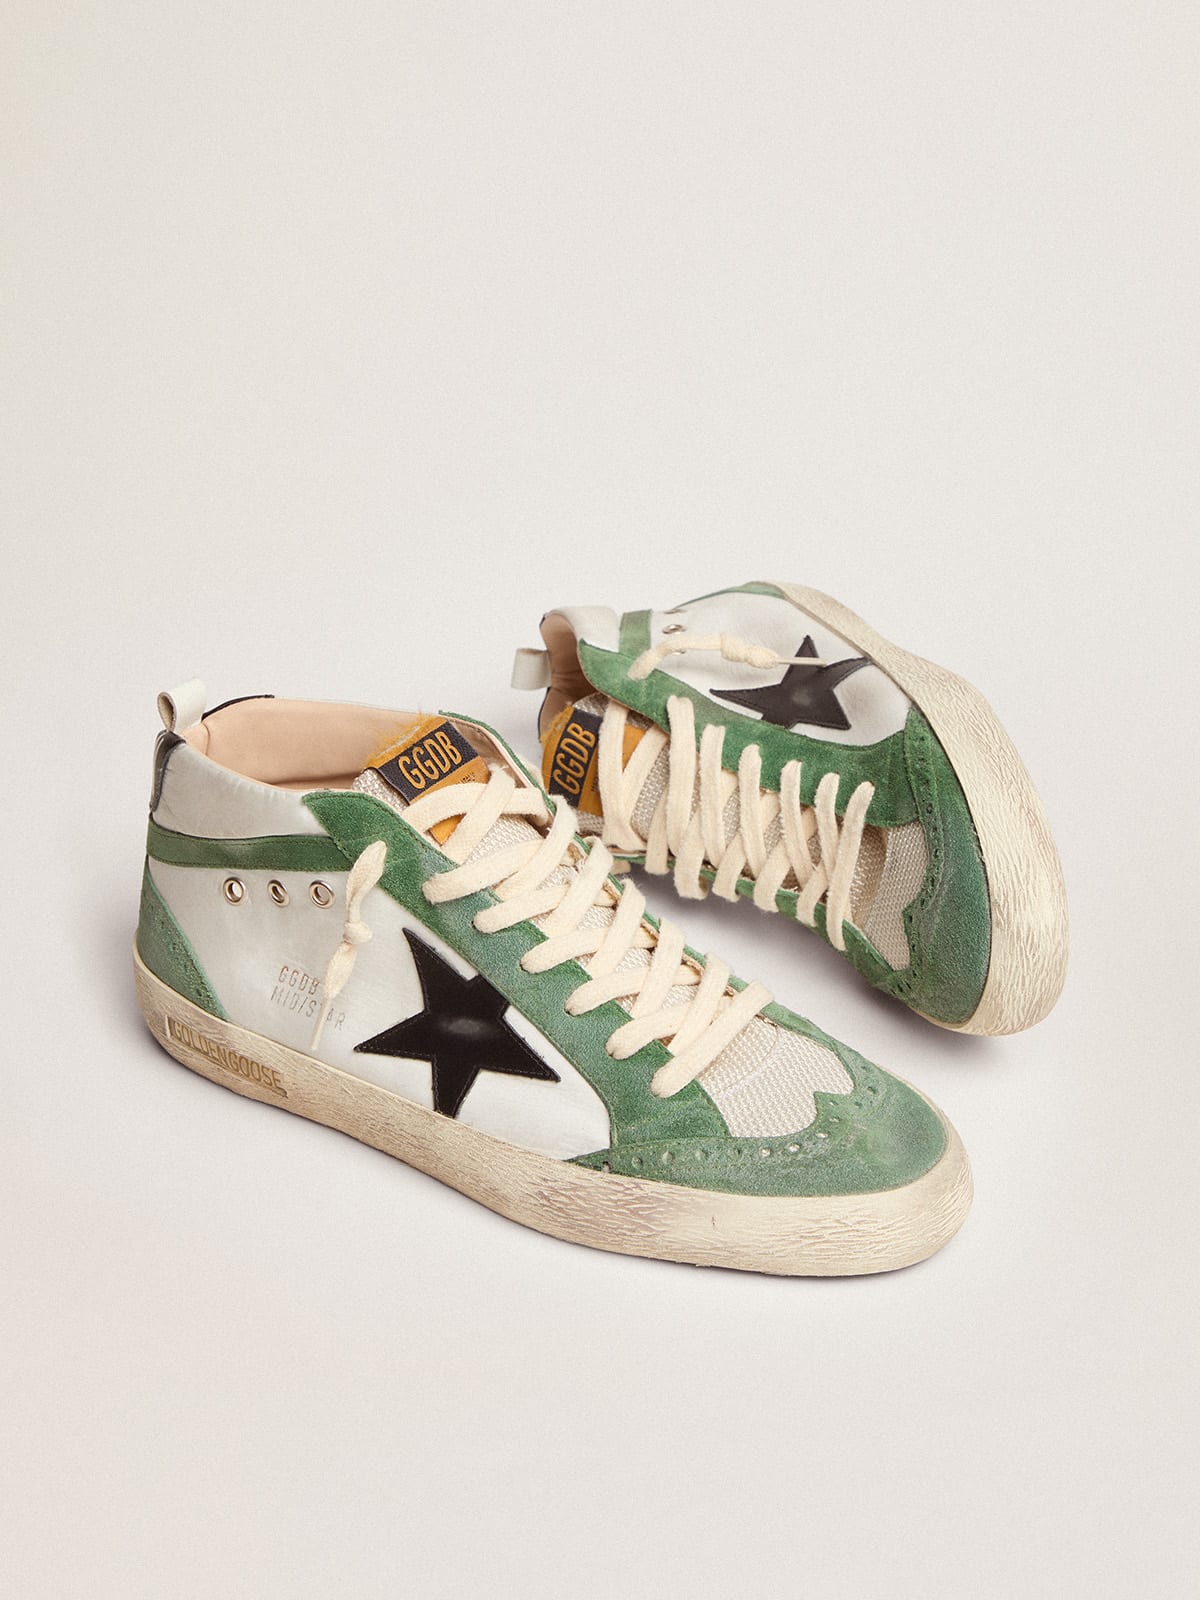 Golden Goose - Mid Star LTD sneakers with black leather star and green suede flash in 